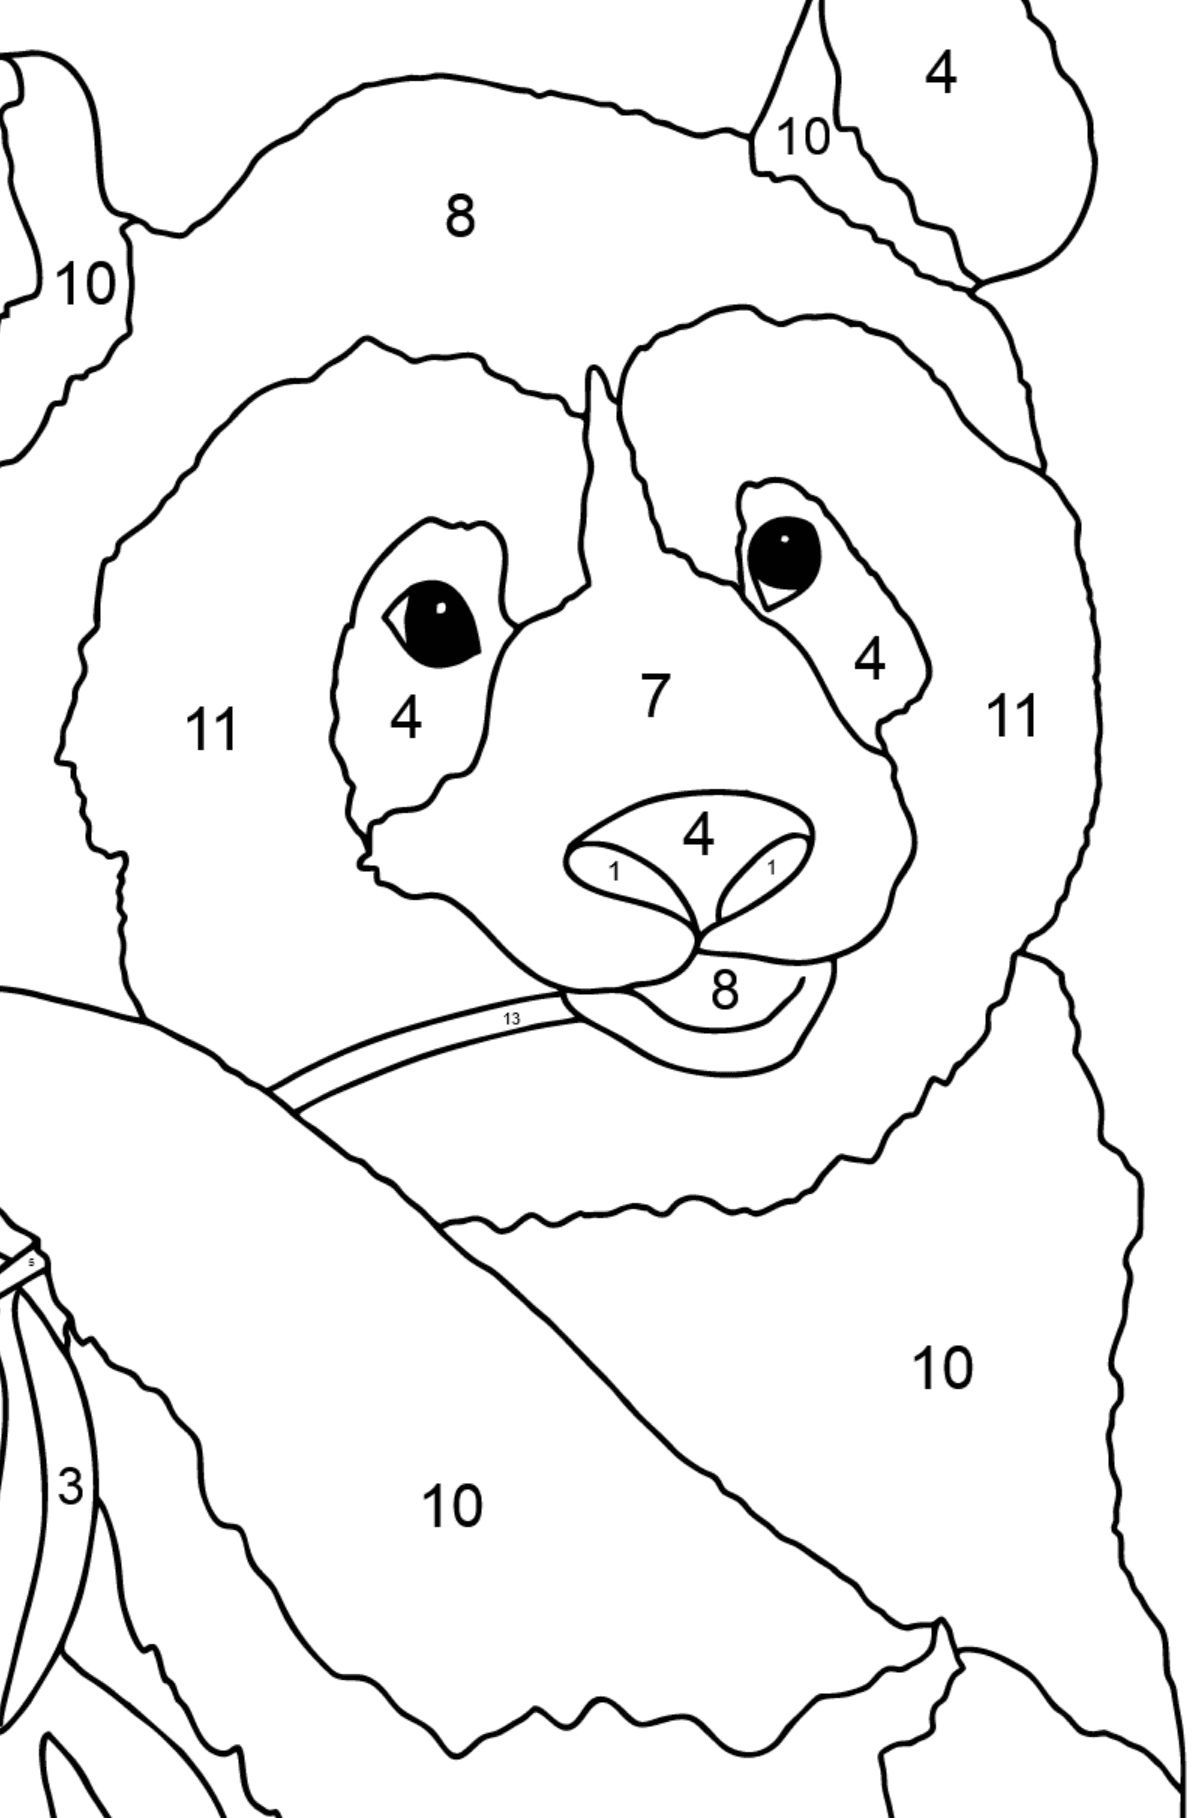 Coloring Page - A Panda is Eating Bamboo Stems and Leaves - Coloring by Numbers for Children